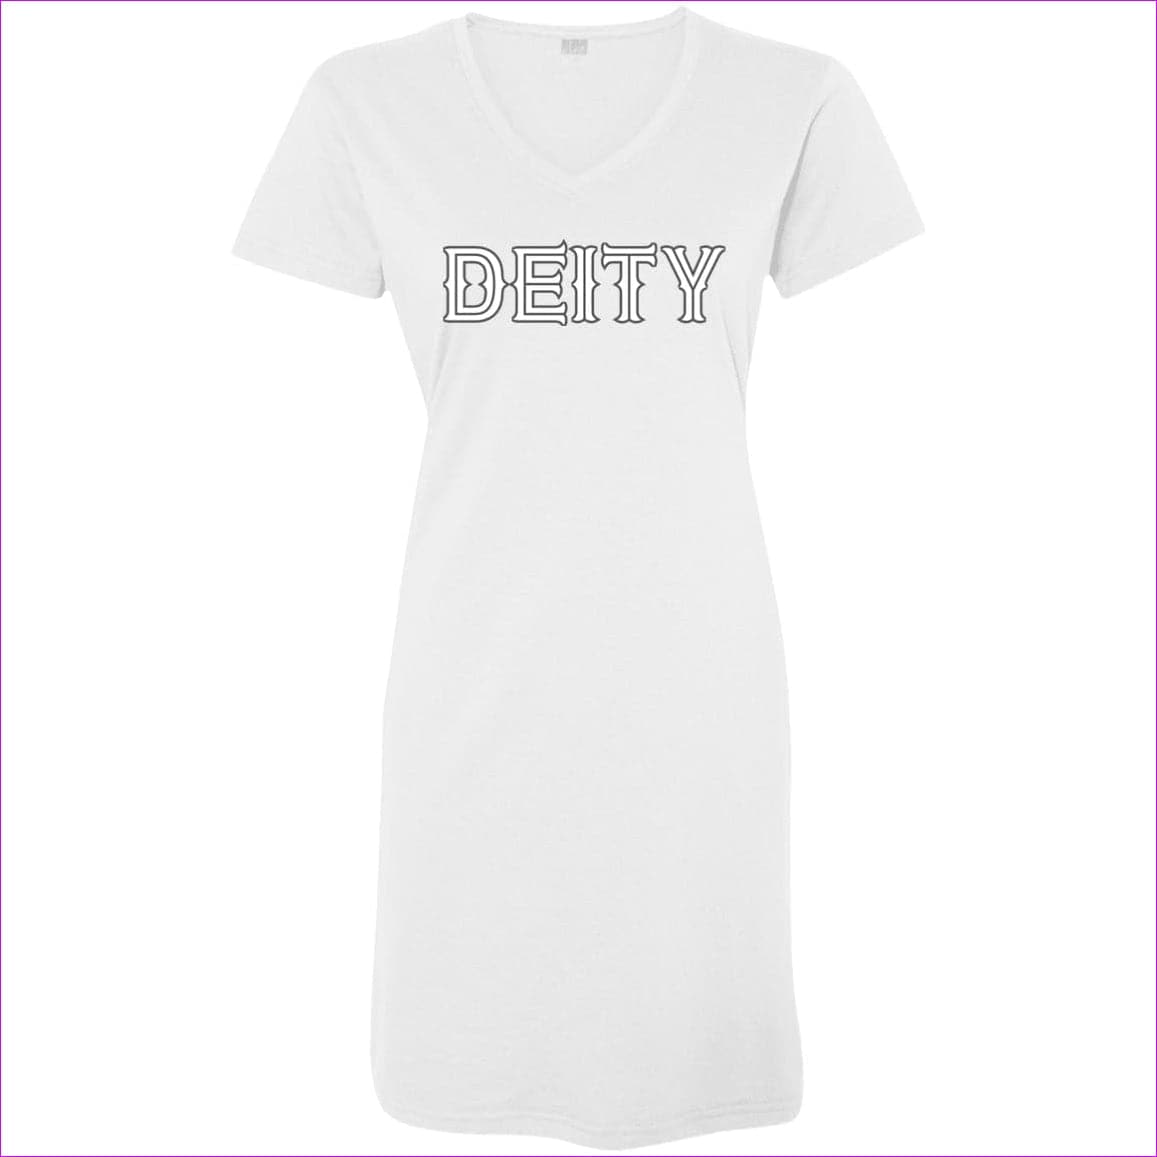 White - Deity Ladies' V-Neck Fine Jersey Cover-Up - womens t-shirt dress at TFC&H Co.